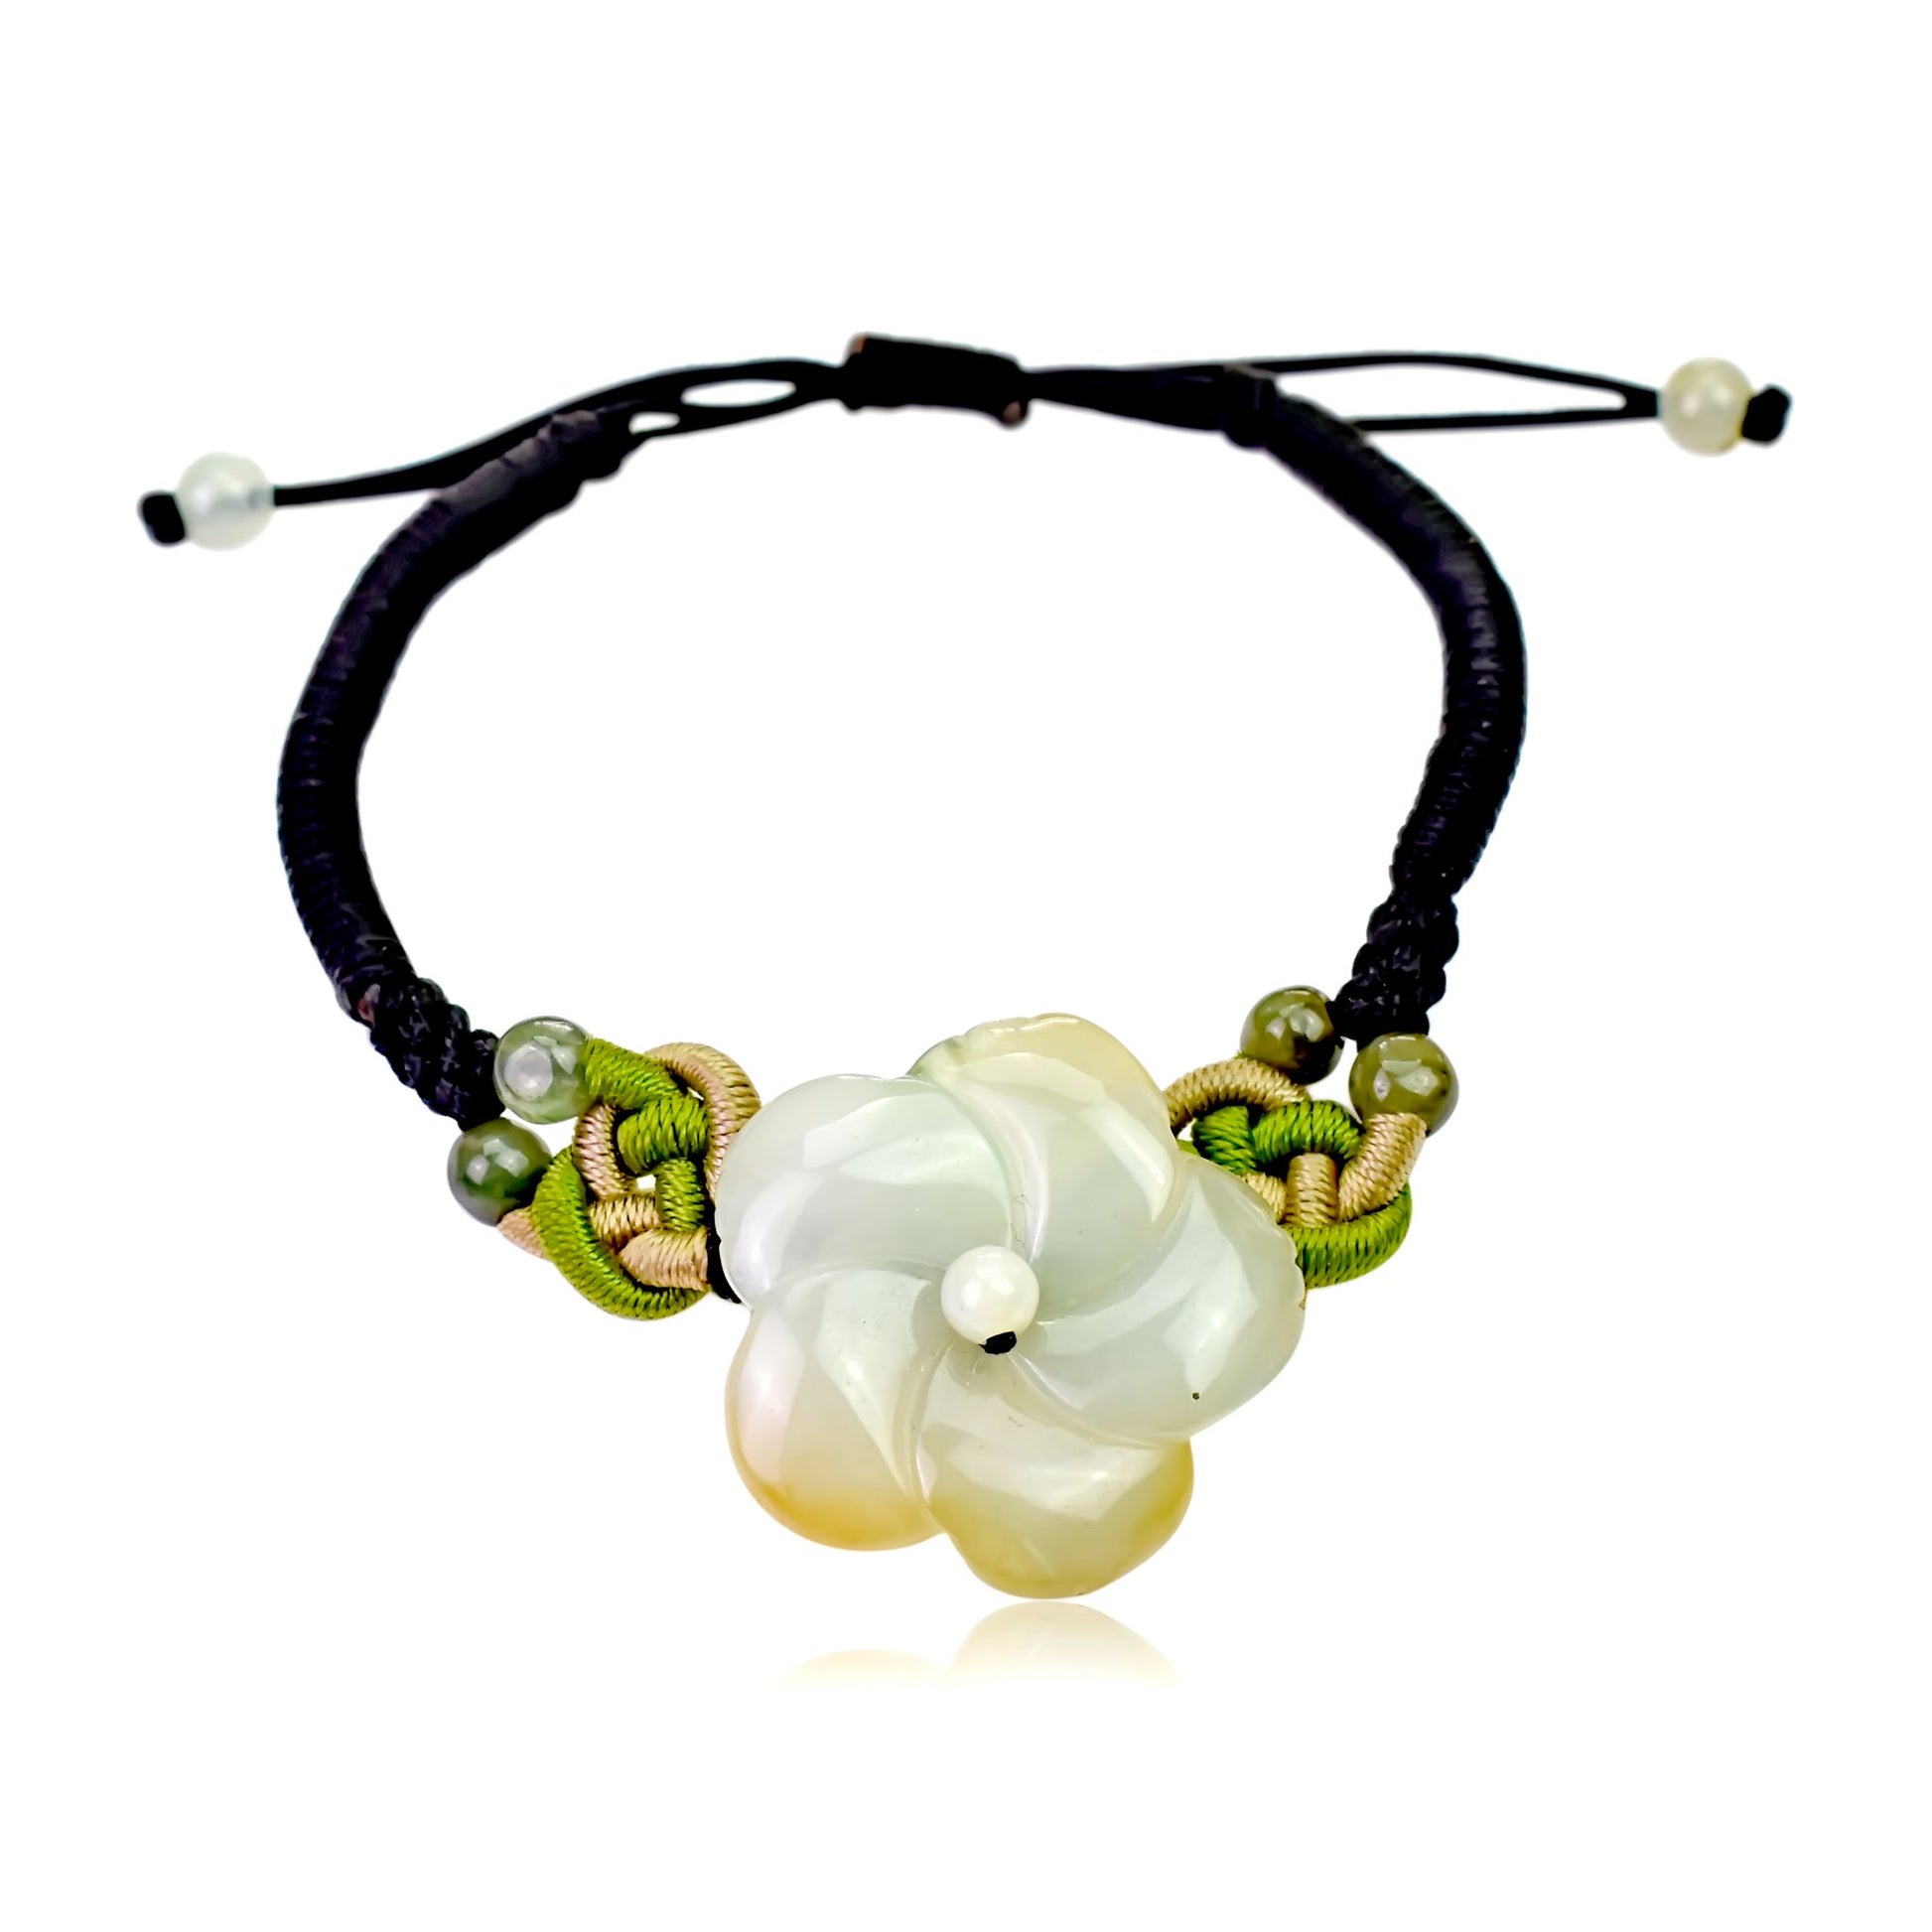 A Timeless Accessory for Any Occasion: Clematis Flower Jade Bracelet made with Black Cord